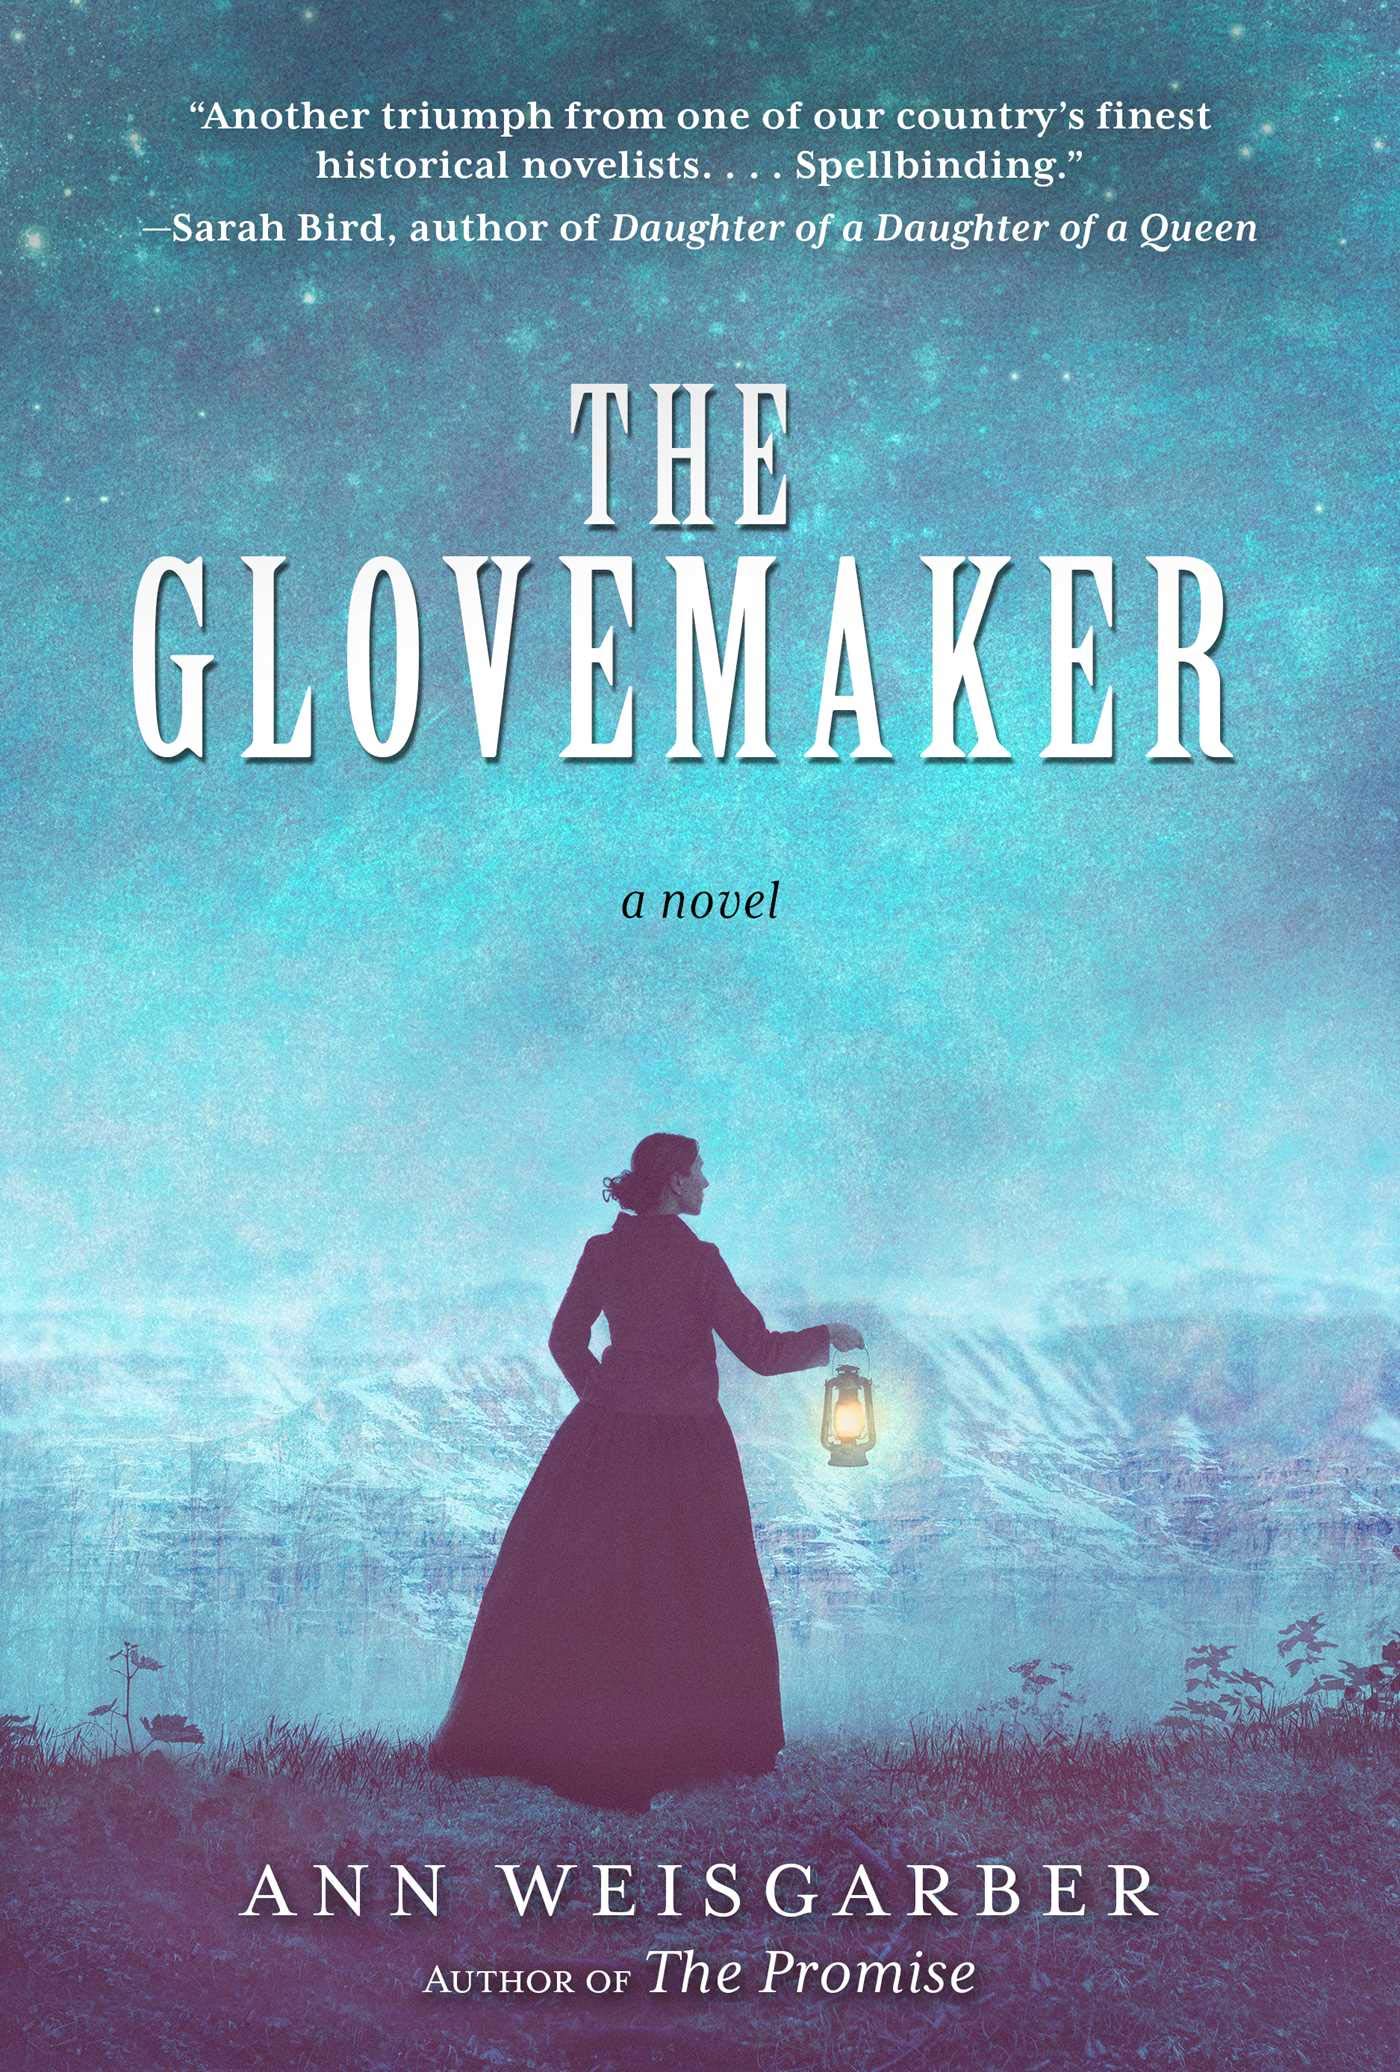 Book Cover: the silhouette of a woman in a long dress, holding a lantern, in front of a background of dark ground and dark blue skies.